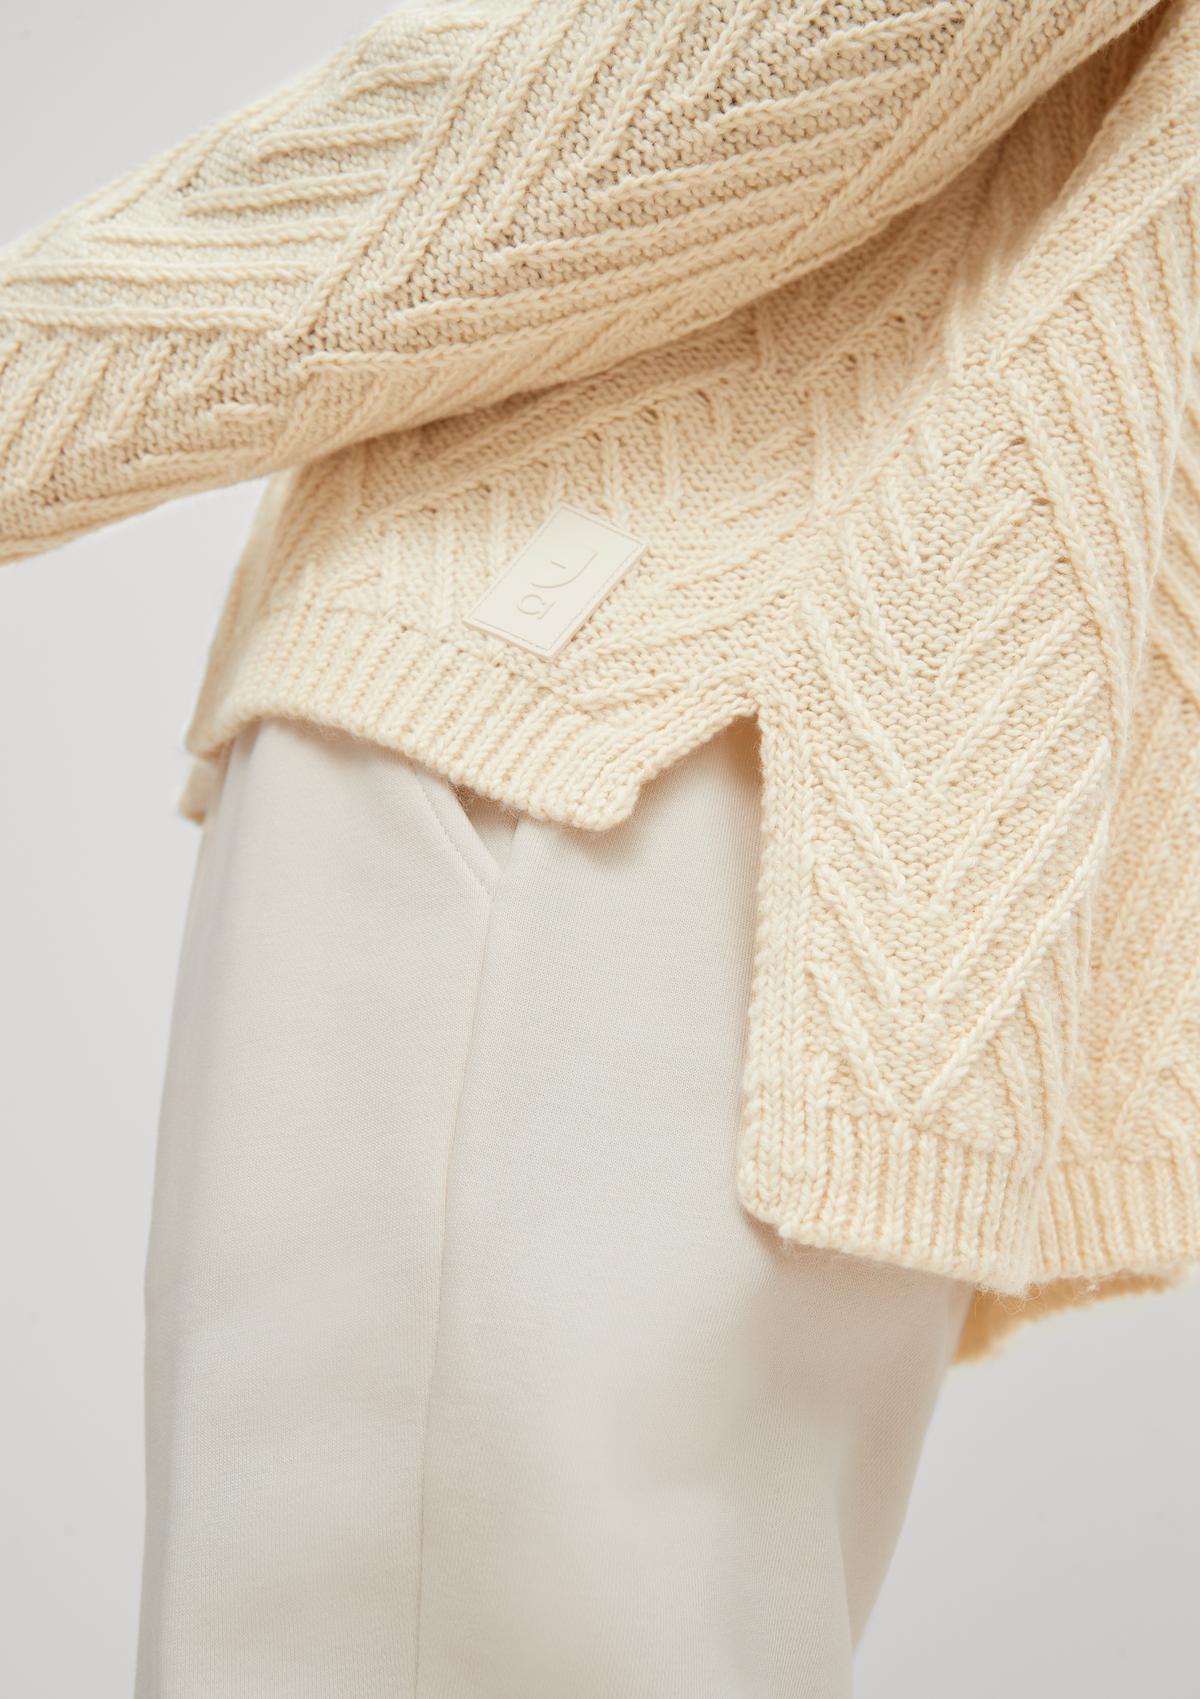 Knitted jumper in a wool blend - white